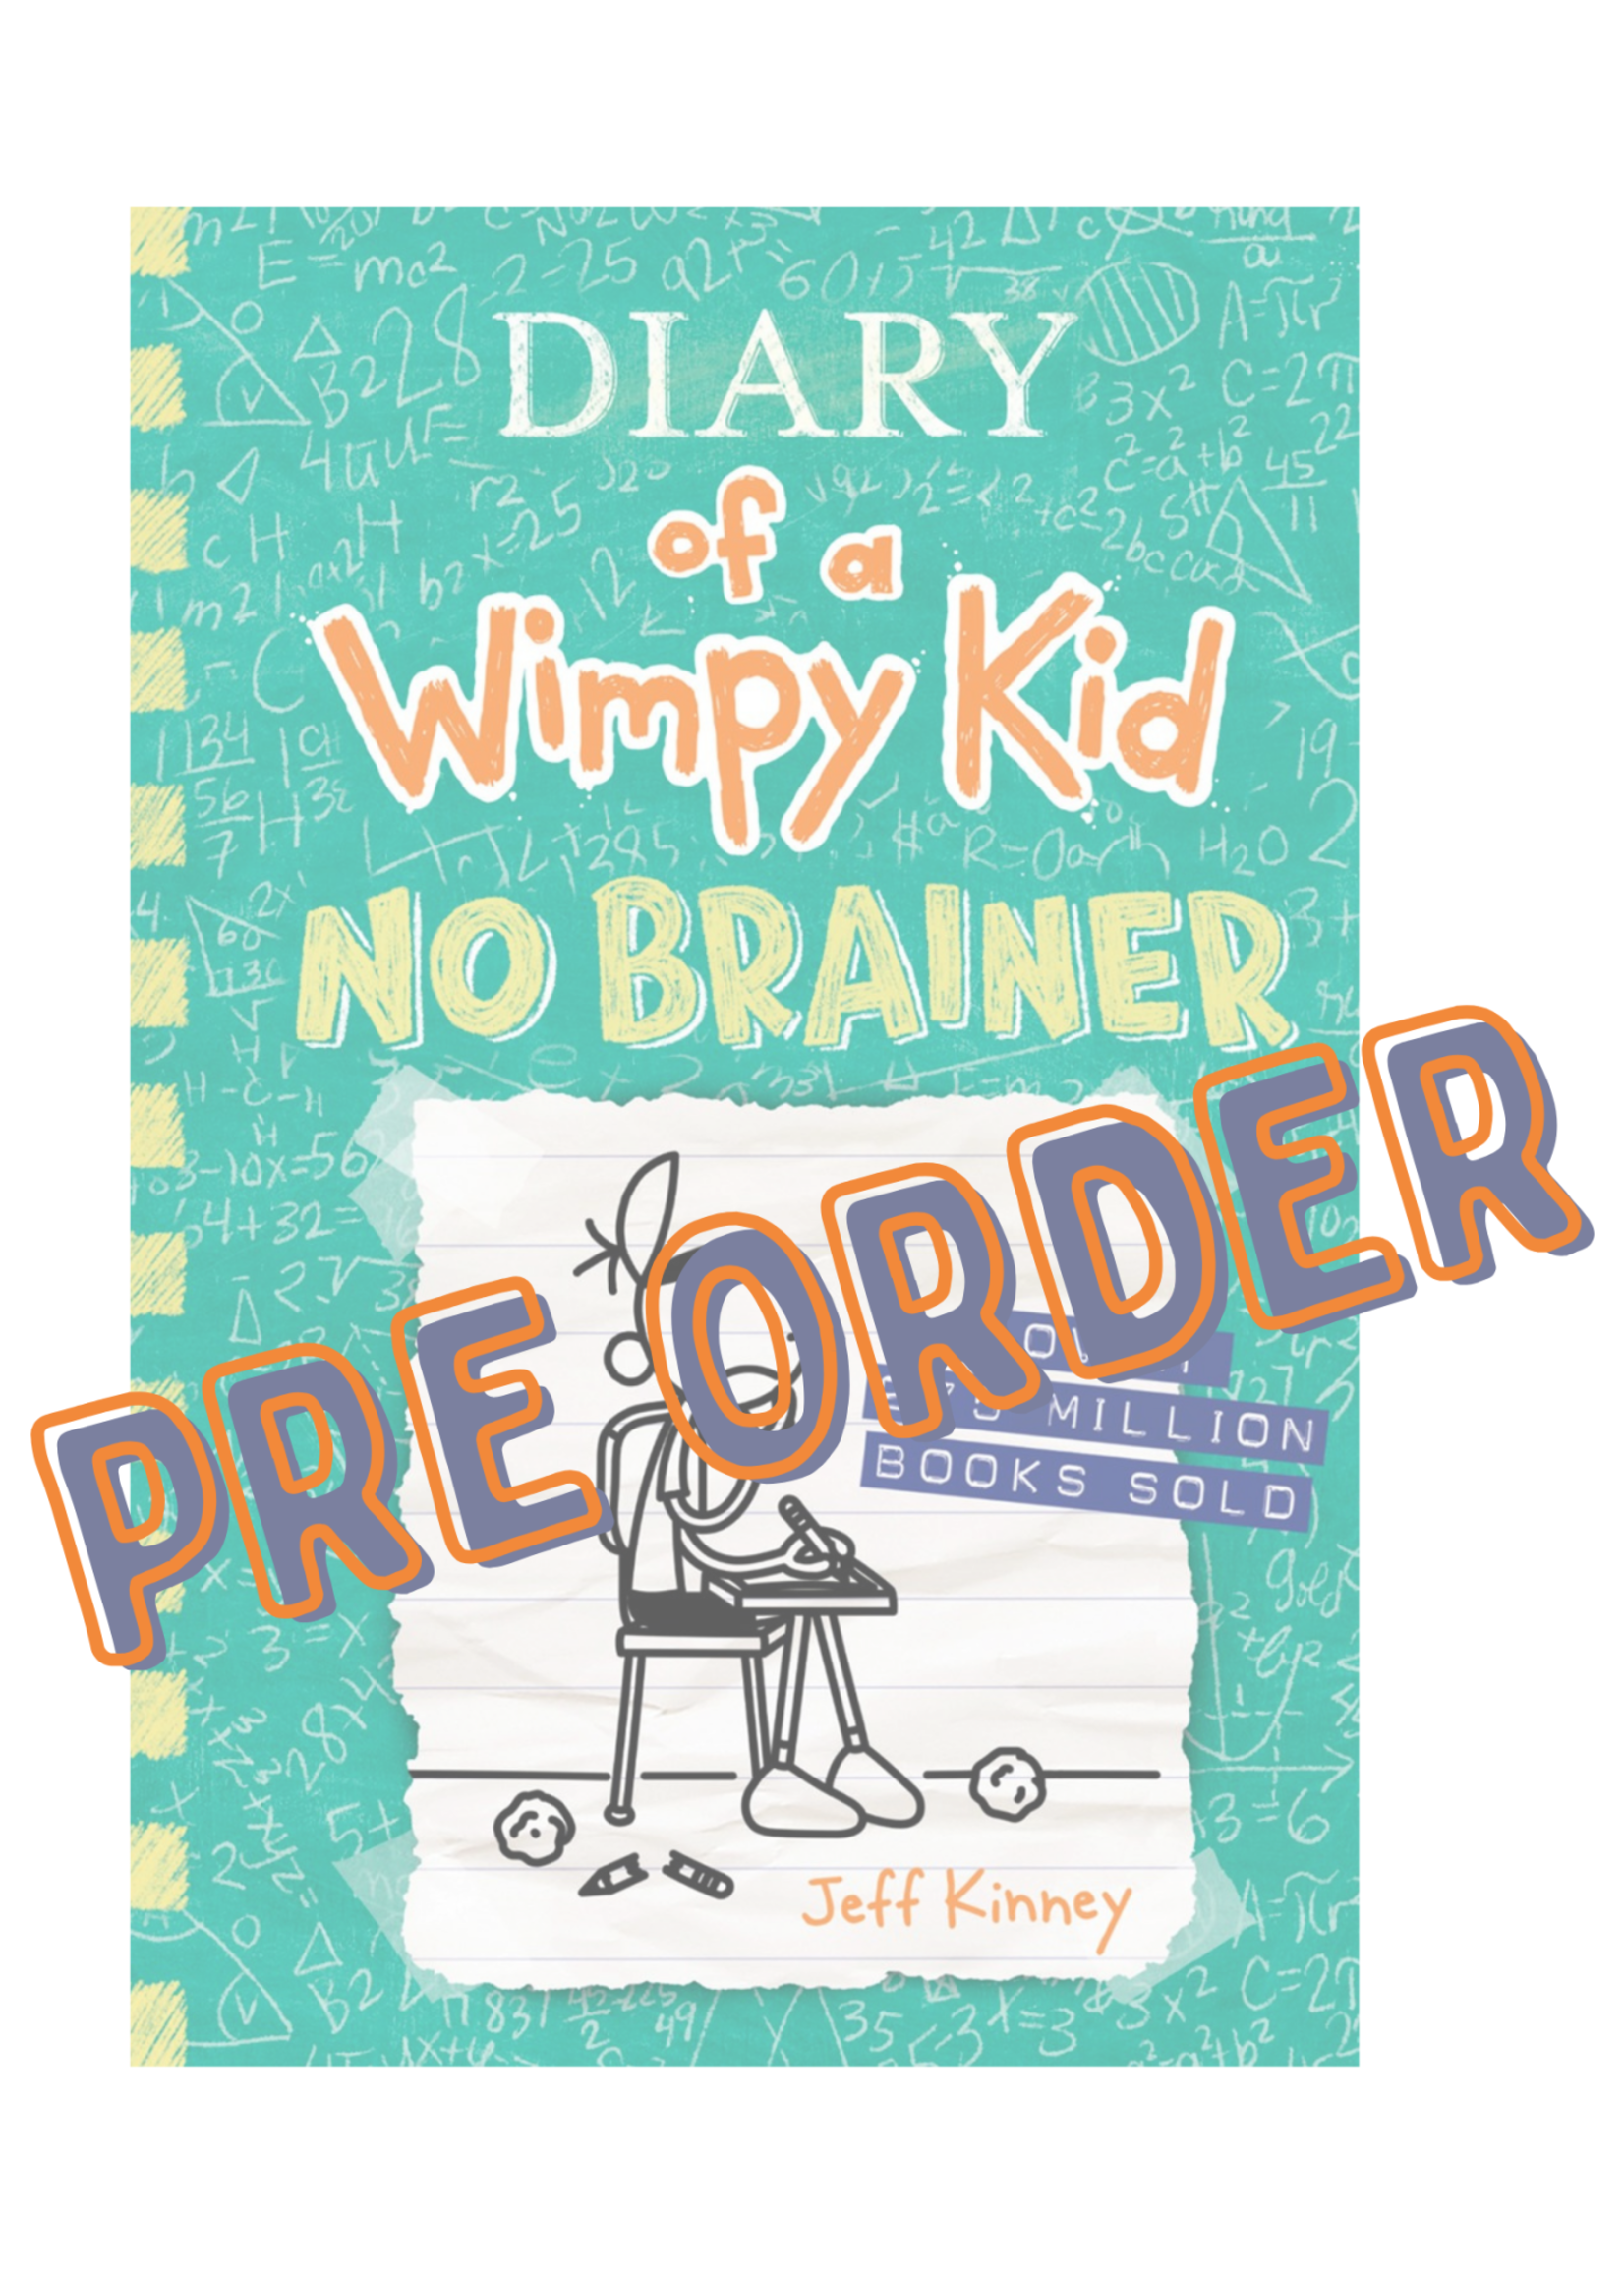 A free bag with the purchase of Diary of a Wimpy Kid 18? It's a No Brainer!  📚: #barnesandnoble #barnesandnoblelakesuccess #bnlakesuc